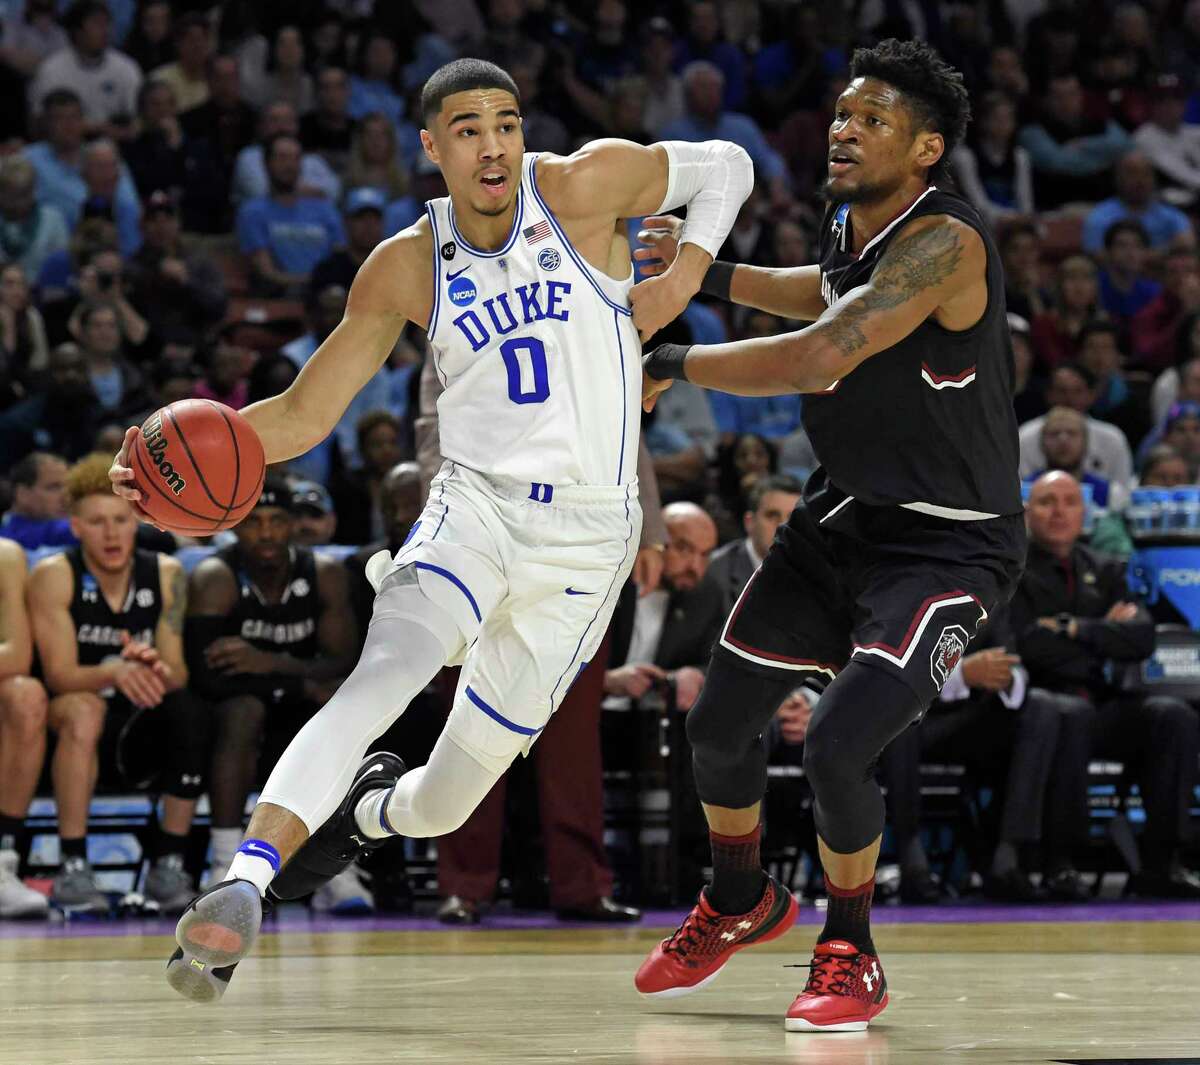 In this March 19, 2017, file photo, Duke's Jayson Tatum, left, drives past South Carolina's Chris Silva during the first half in a second-round game of the NCAA men's college basketball tournament, in Greenville, S.C. The top forwards in ThursdayÂ?’s NBA draft needed only a season in college to secure their position in the lottery. KansasÂ?’ Josh Jackson and DukeÂ?’s Jayson Tatum are one-and-done small forwards with size and athleticism, while Florida StateÂ?’s Jonathan Isaac and ArizonaÂ?’s Lauri Markkanen headline the crop of power forwards or stretch-4s with the potential to play inside or out.